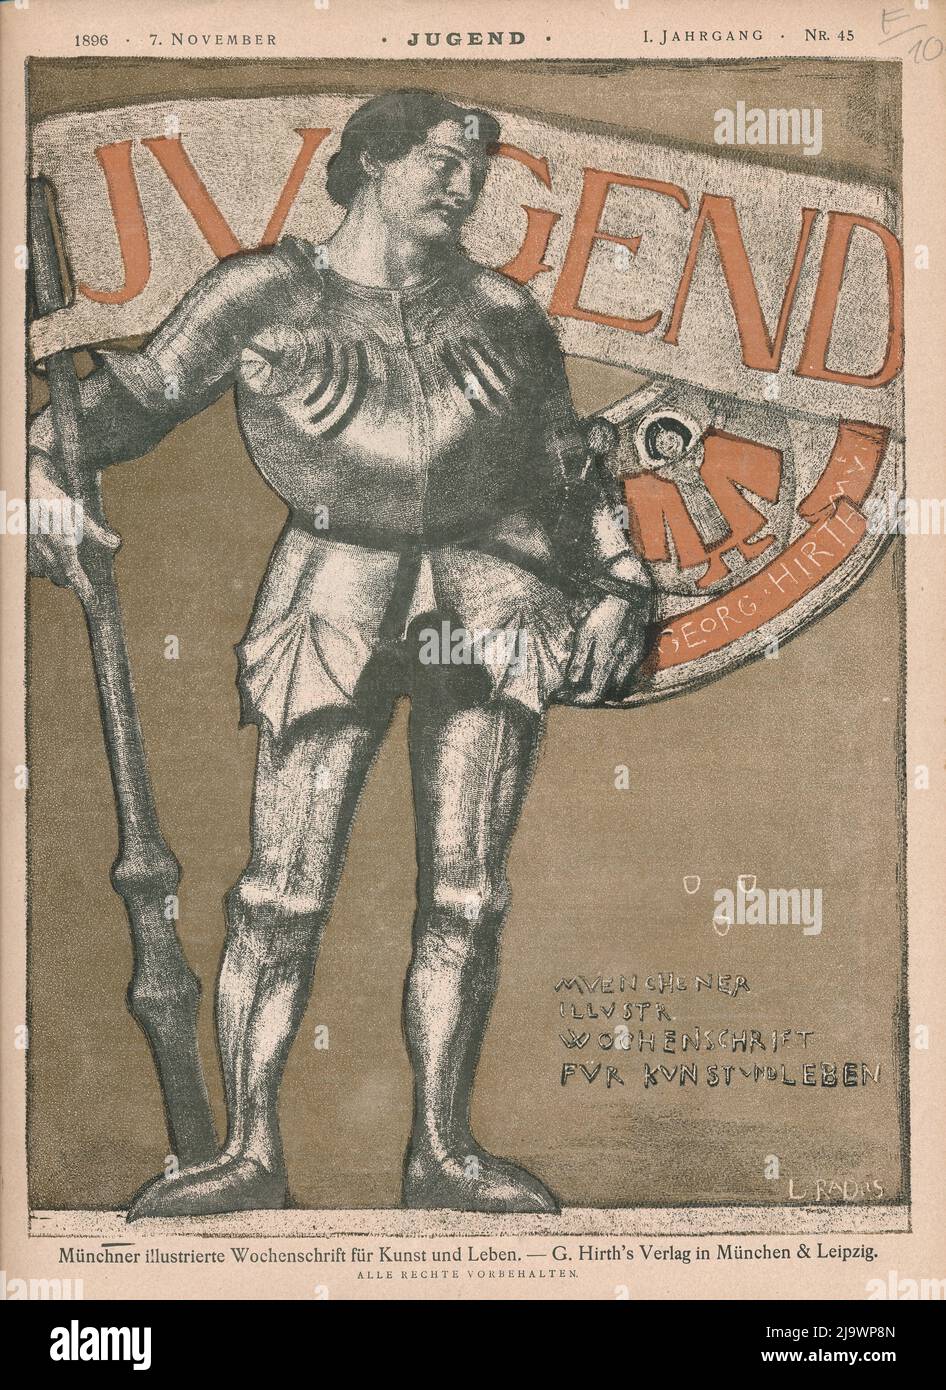 German Art Magazine Jugend, 1896. It was an art and literary magazine founded by Georg Hirth and von Ostini and published in Munich from 1896 to 1940. Stock Photo